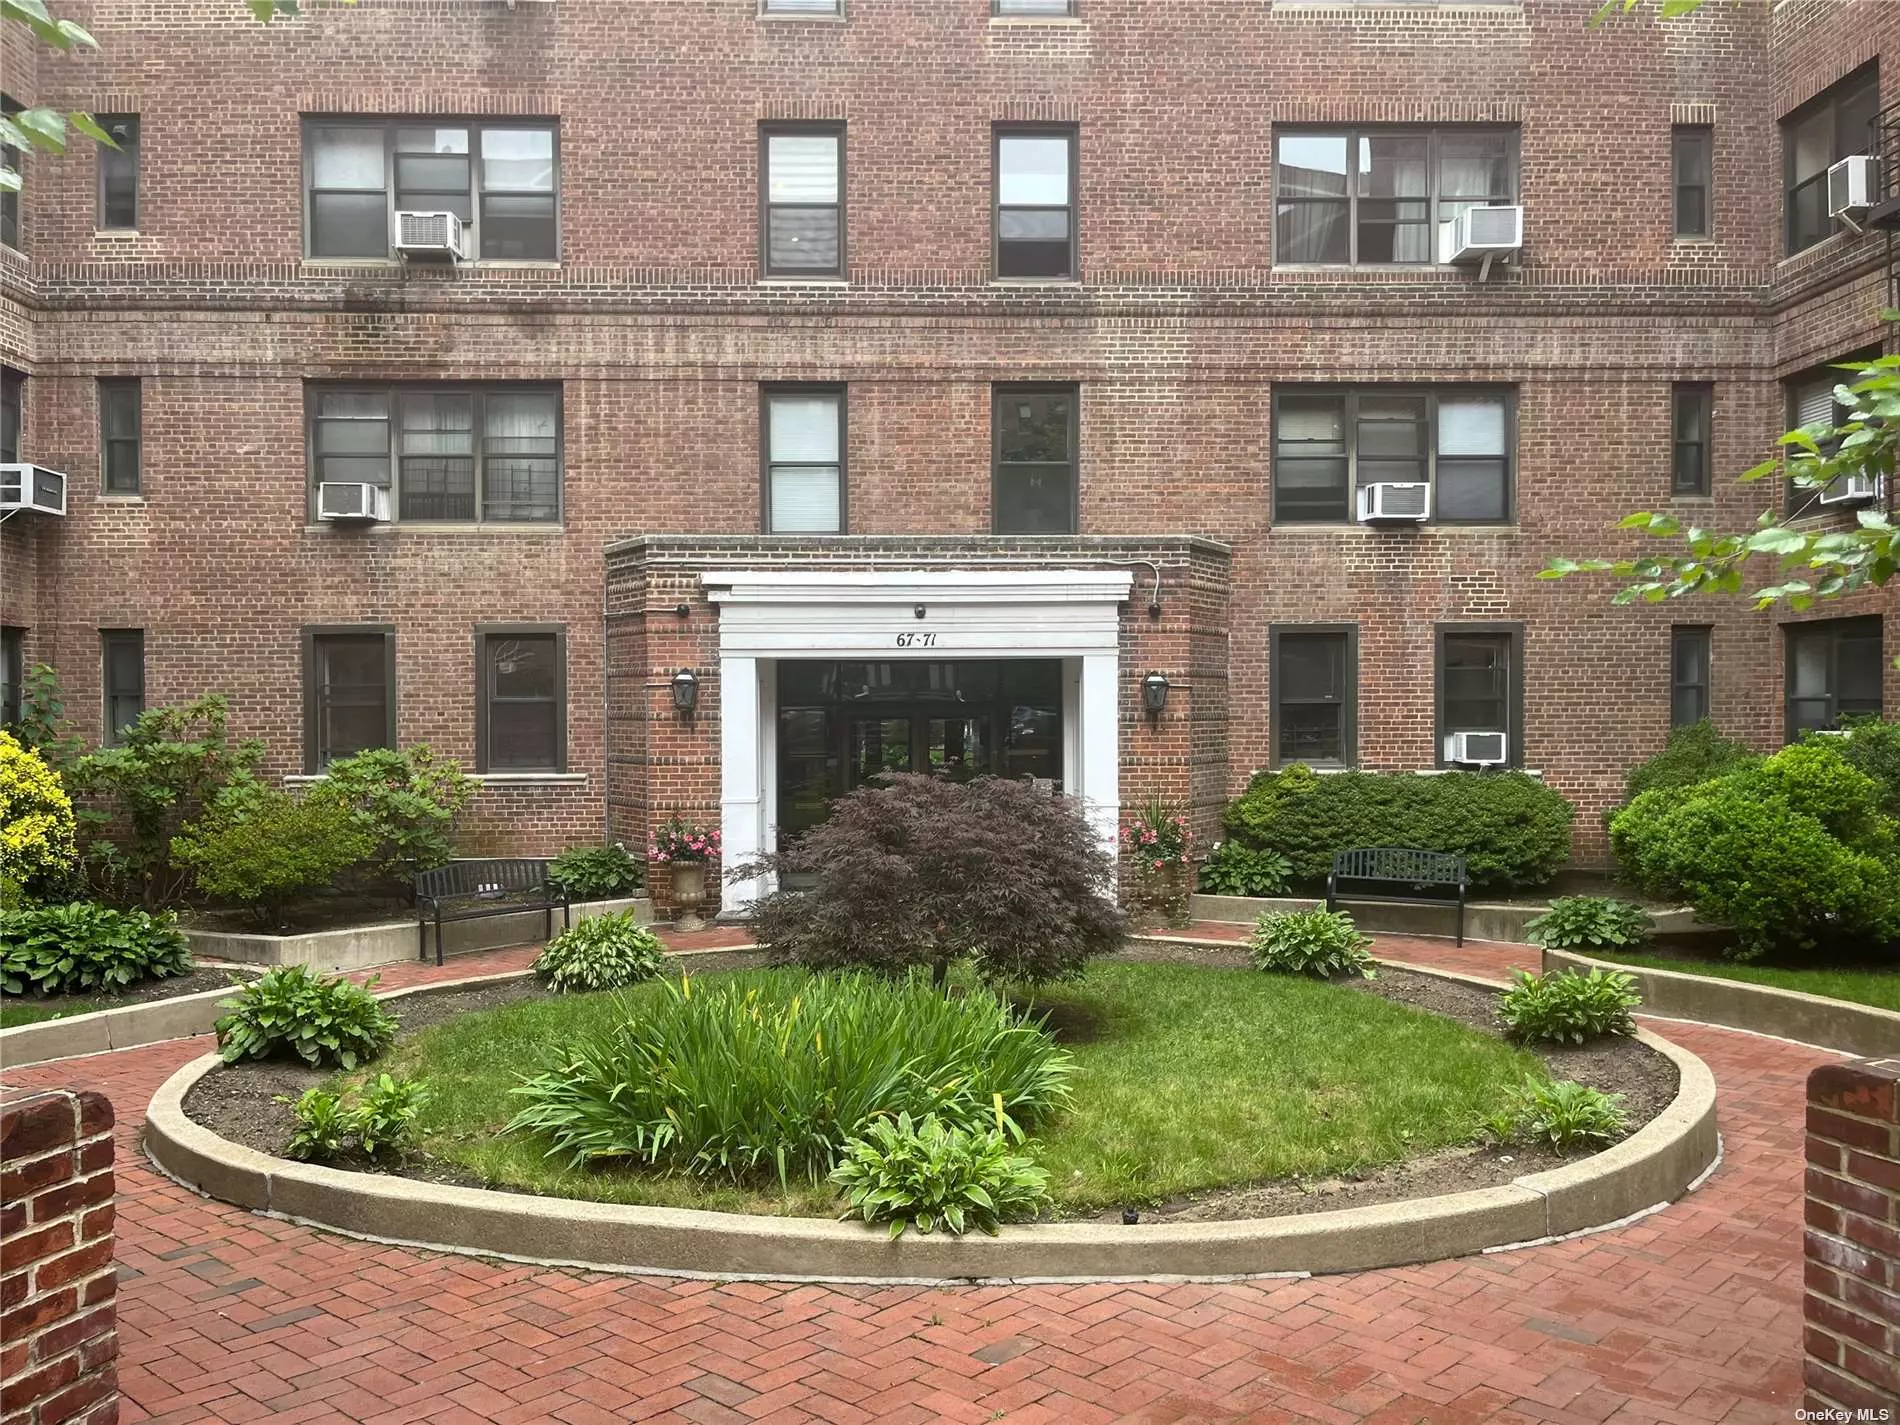 This spacious, sunny one bedroom unit has a renovated bathroom, beautiful hardwood floors, carpeting in the bedroom, 9&rsquo; ceilings. Eat-in Kitchen. This Lincoln Development is a financially sound building located in the heart of Forest Hills. Part-time doorman service, laundry room, maintenance staff on premises.